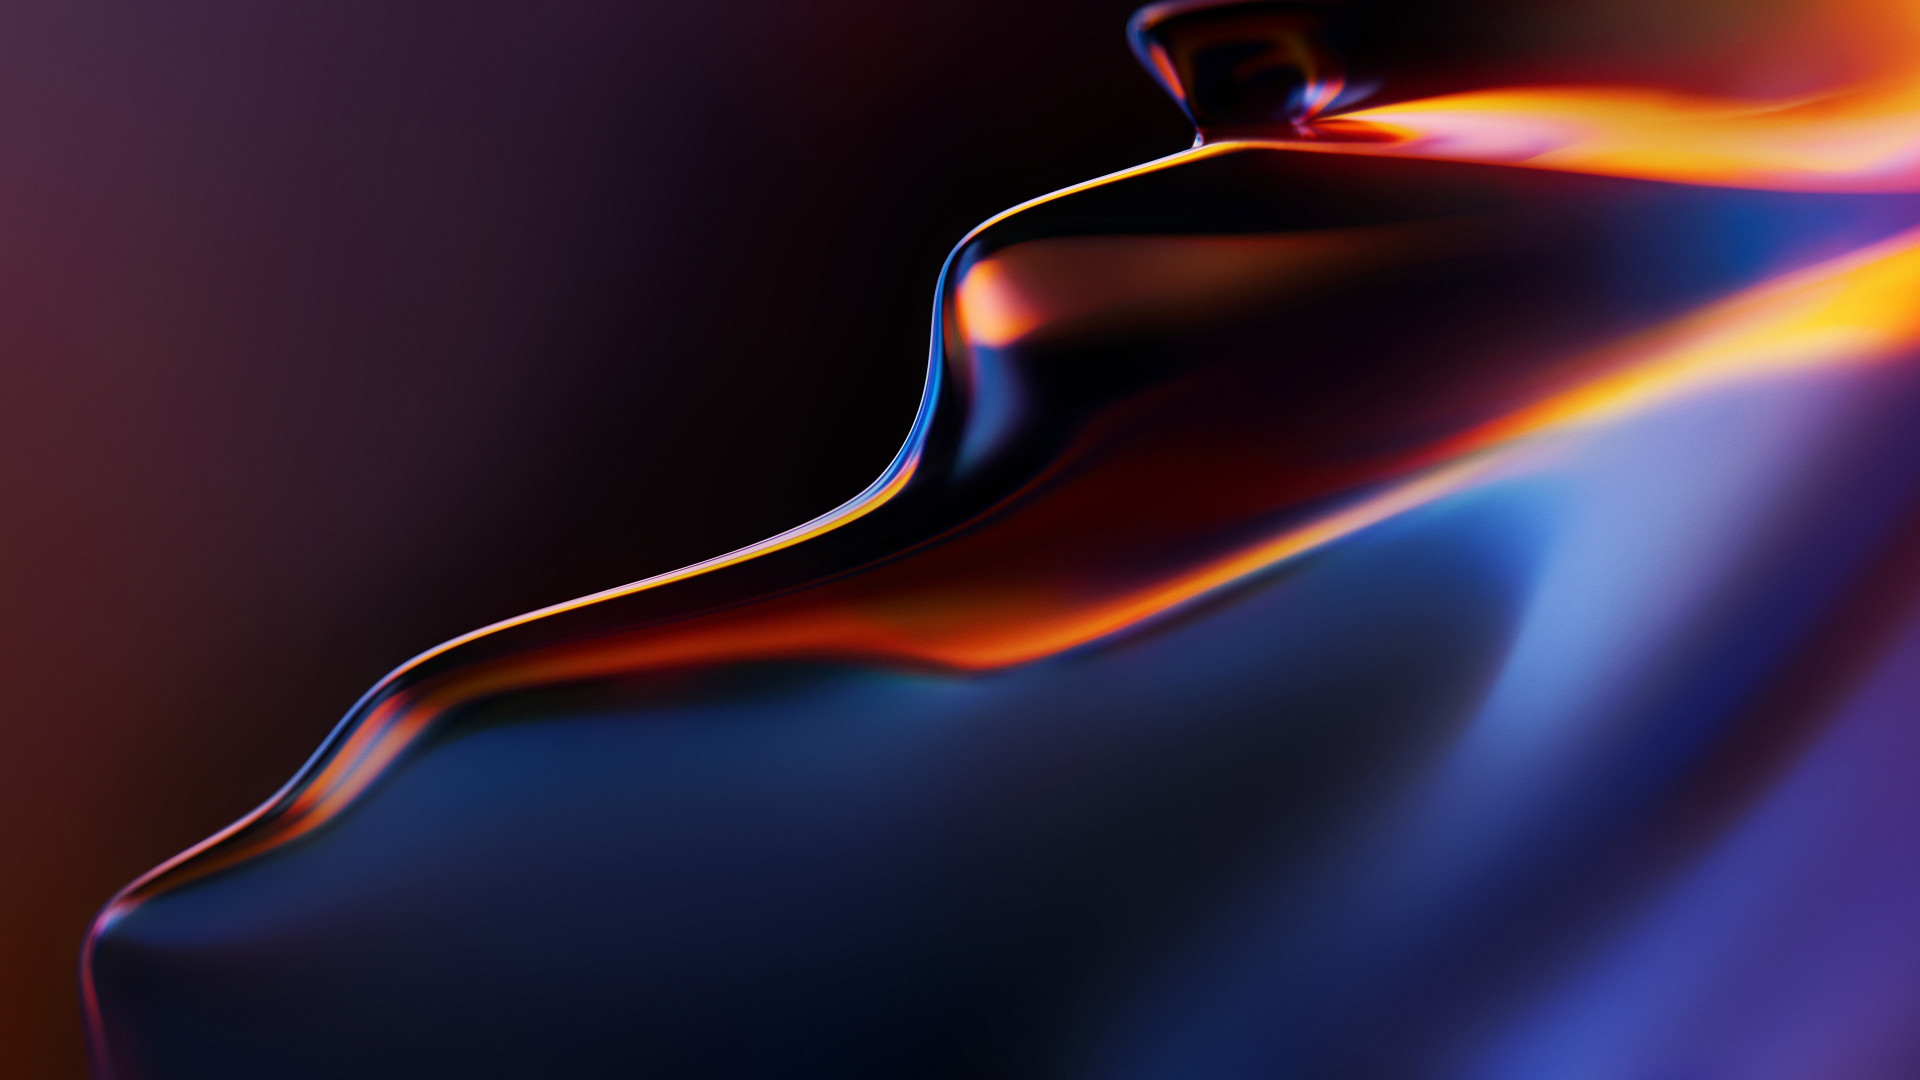 Abstract, flow, OnePlus 6T wallpaper 1920x1080